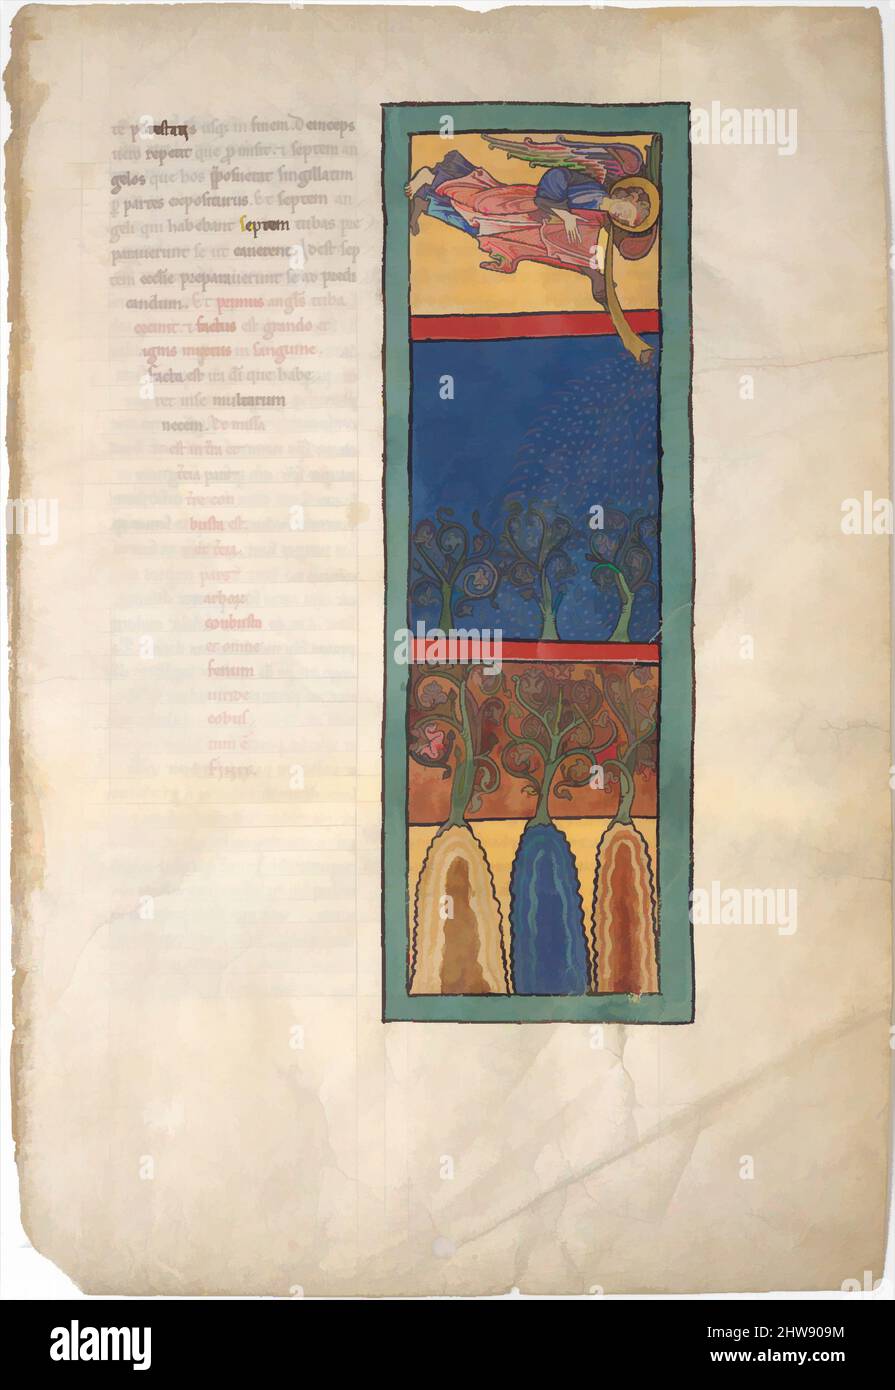 Art inspired by Leaf from a Beatus Manuscript: the First Angel Sounds the Trumpet; Fire, Hail-stones, and Blood are Cast Upon the Earth, ca. 1180, Spanish, Tempera, gold, and ink on parchment, Overall (folio): 17 1/2 x 11 13/16 in. (44.4 x 30 cm), Manuscripts and Illuminations, Classic works modernized by Artotop with a splash of modernity. Shapes, color and value, eye-catching visual impact on art. Emotions through freedom of artworks in a contemporary way. A timeless message pursuing a wildly creative new direction. Artists turning to the digital medium and creating the Artotop NFT Stock Photo